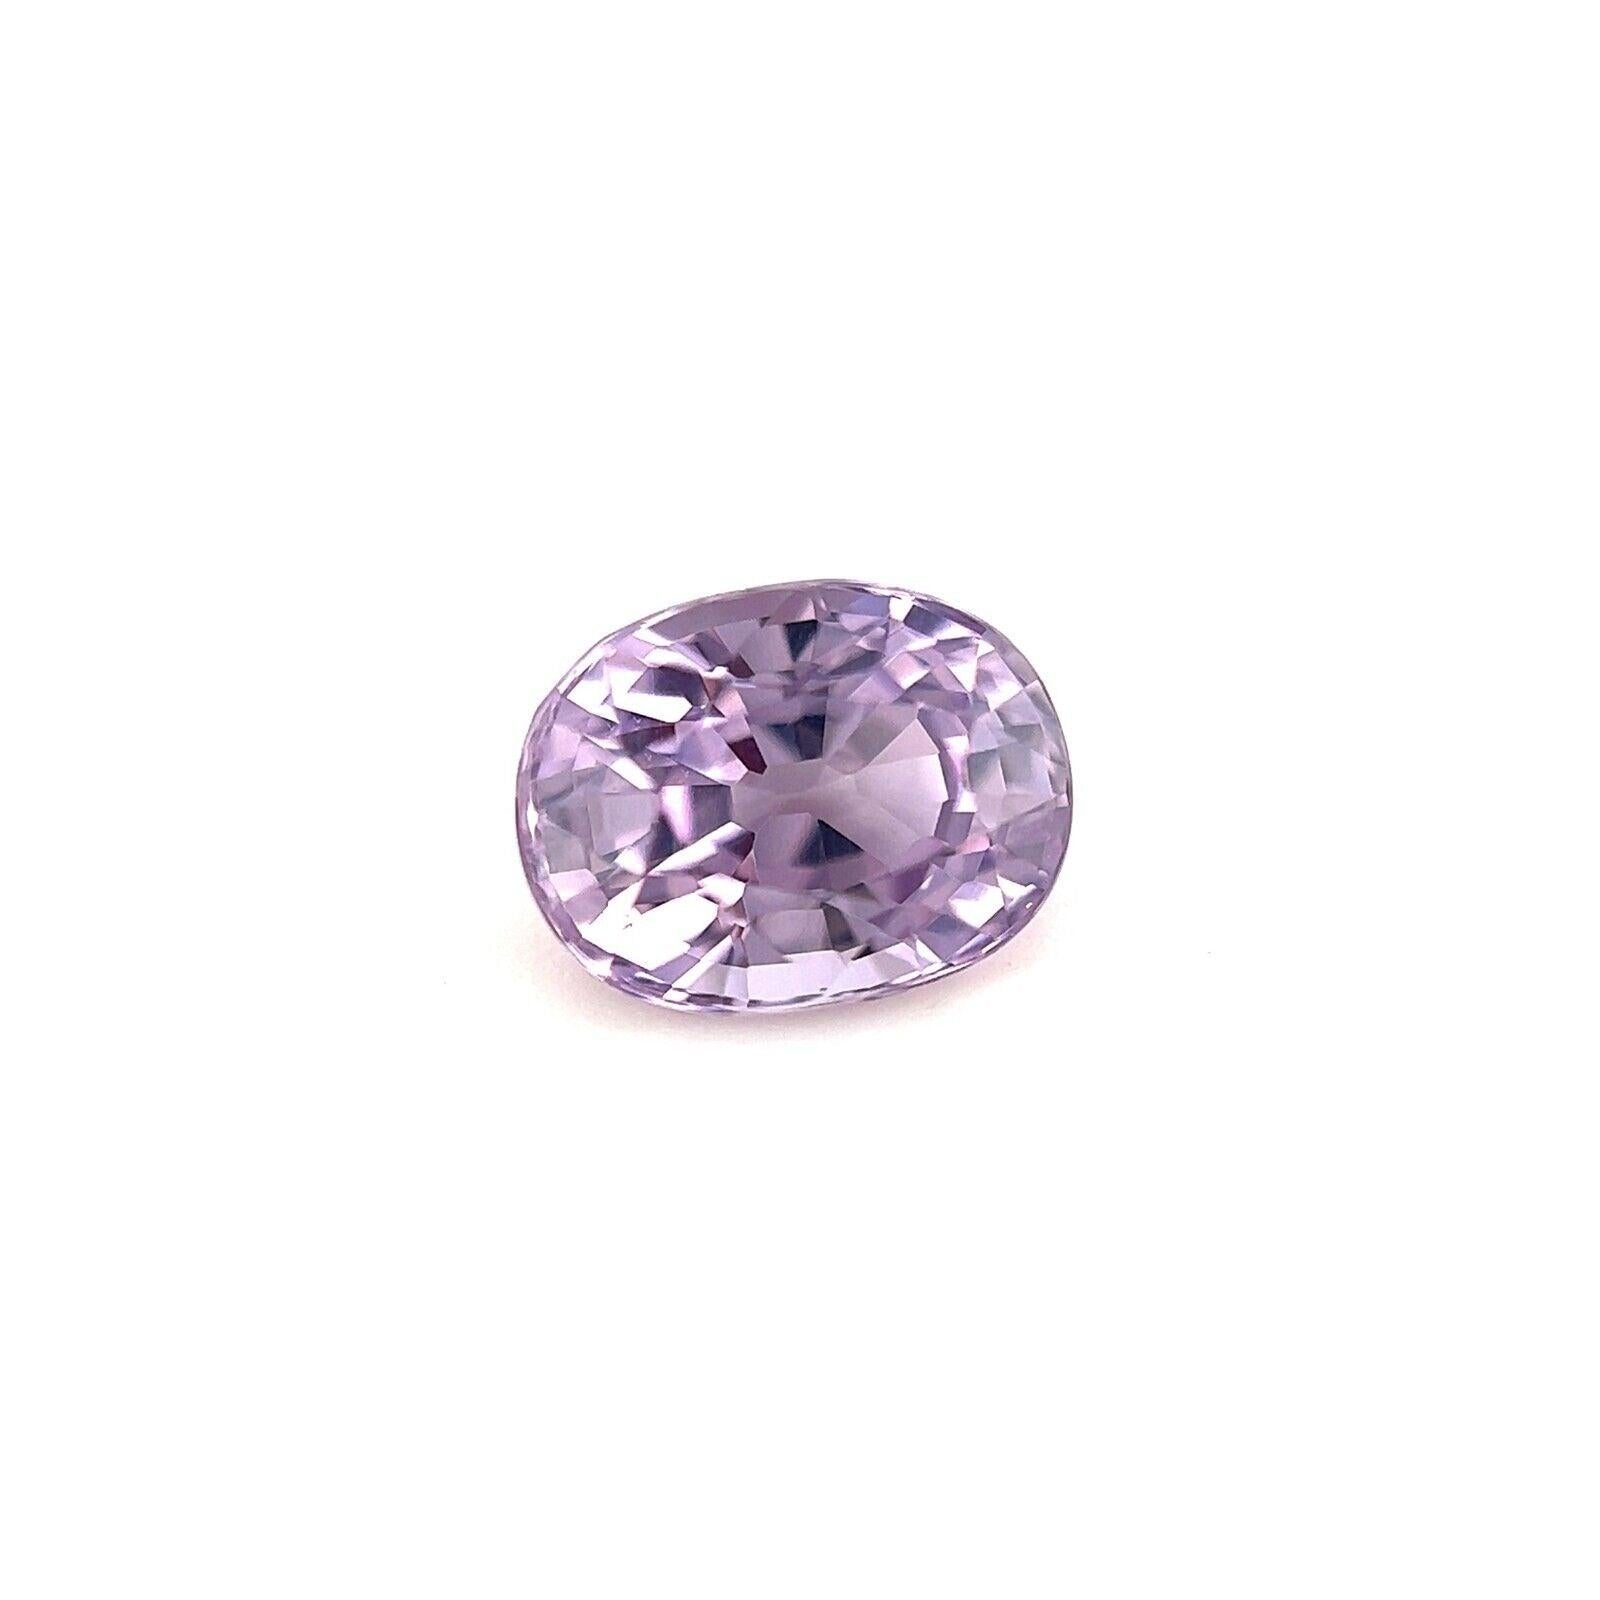 1.37ct Vivid Pink Purple Violet Natural Spinel Oval Cut 7.2x5.4mm Loose Gem VS

Natural Pink Purple Violet Spinel Gemstone.
1.37 Carat spinel with a vivid pink purple violet colour and very good clarity, VS.Very clean stone, also has an excellent